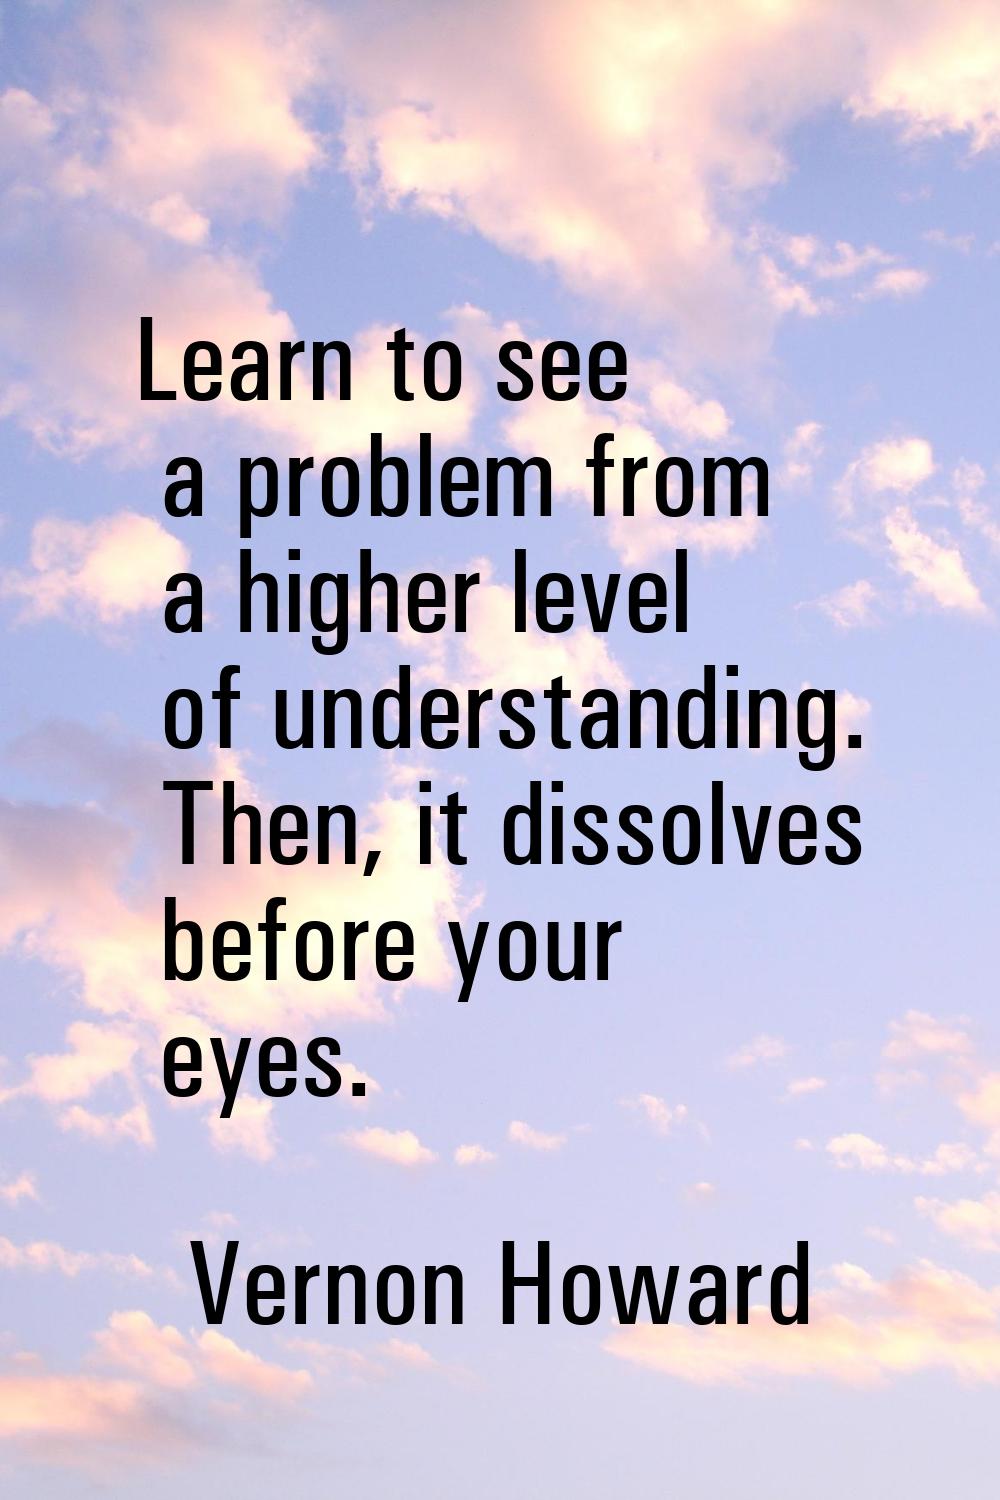 Learn to see a problem from a higher level of understanding. Then, it dissolves before your eyes.